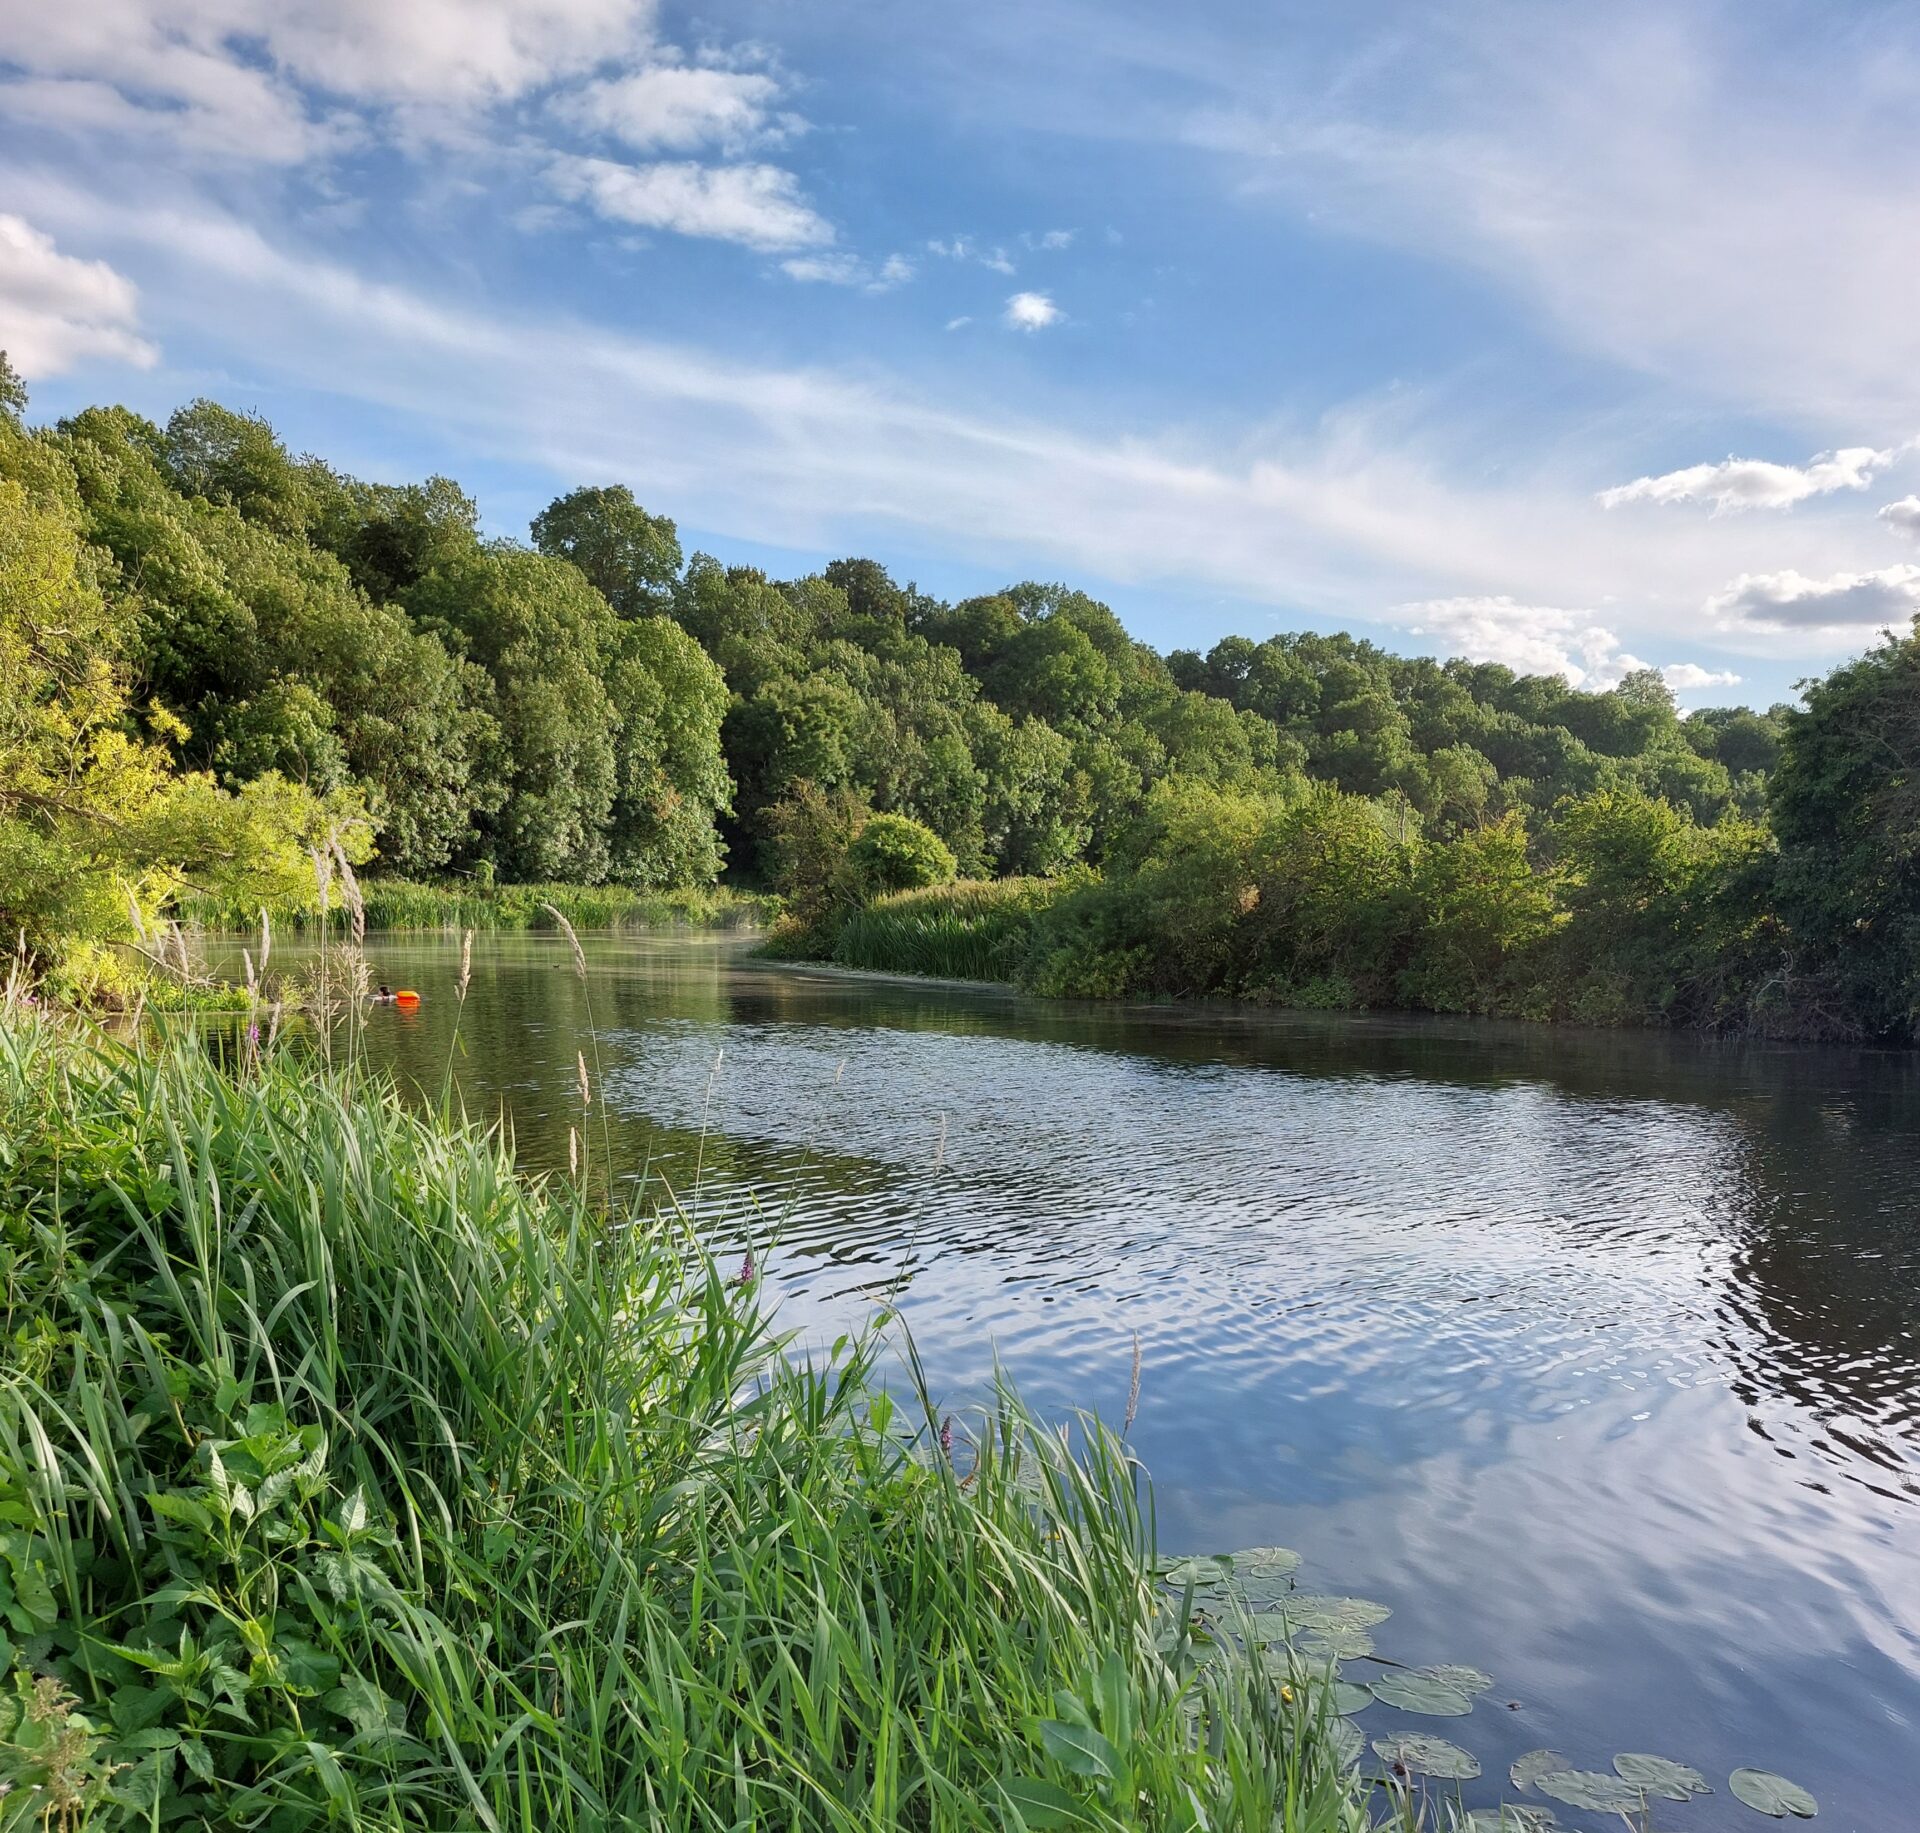 Places to swim near Chipping Campden - a local river and woods